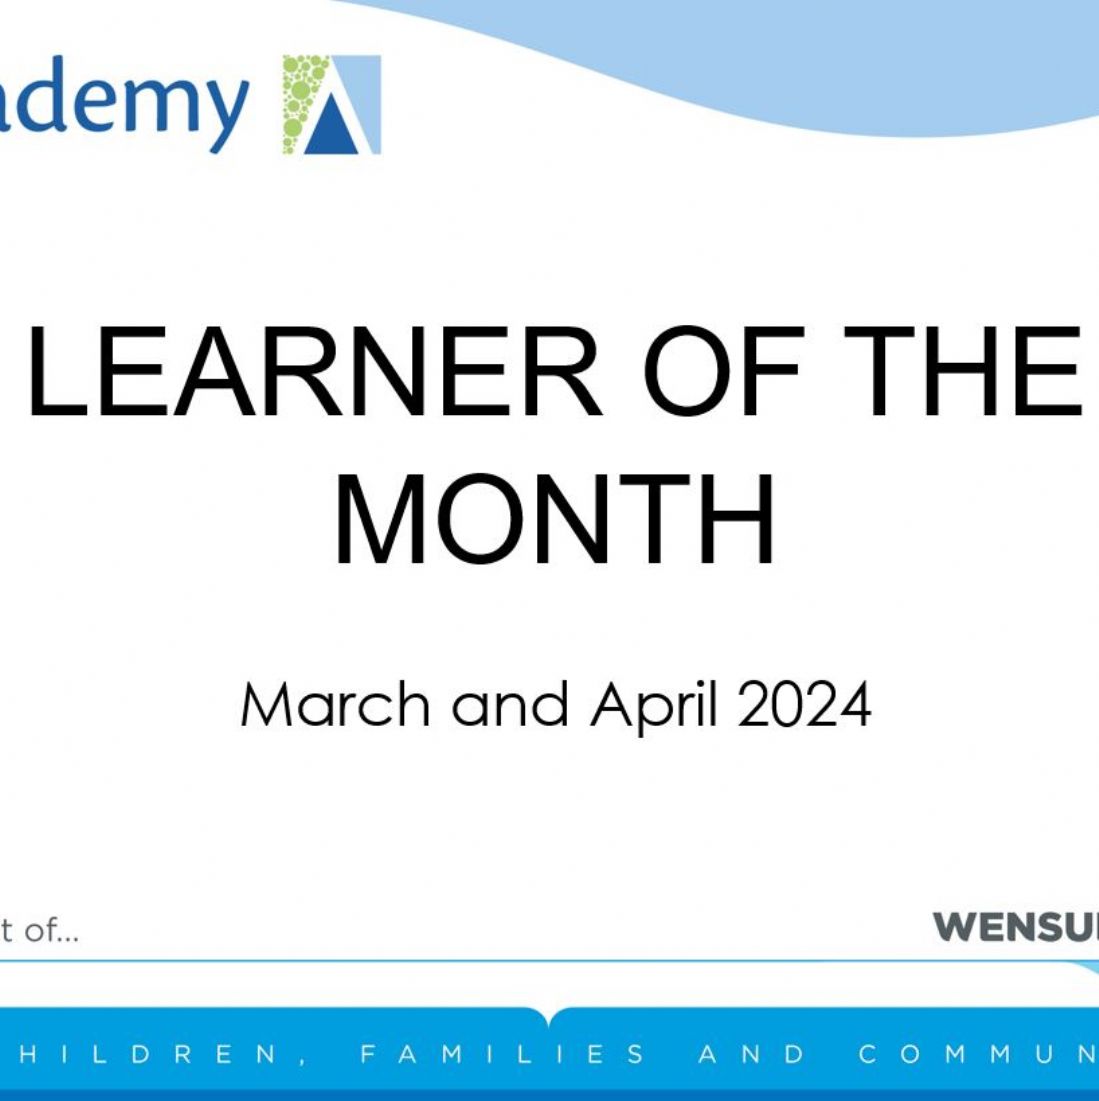 Learner of the Month - March and April 2024